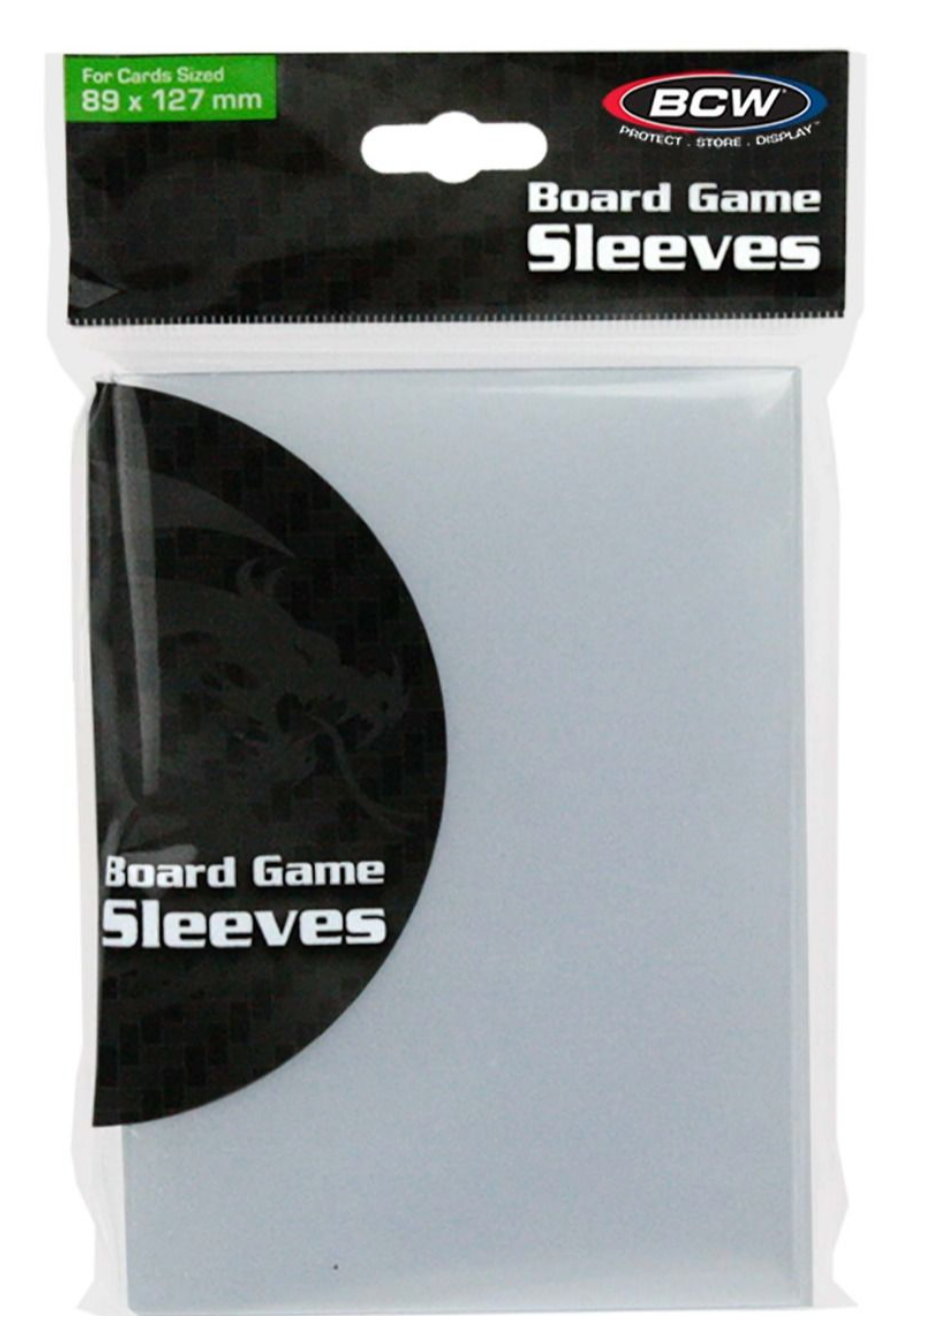 Board Game Sleeves - Oversized 89 x 127 mm